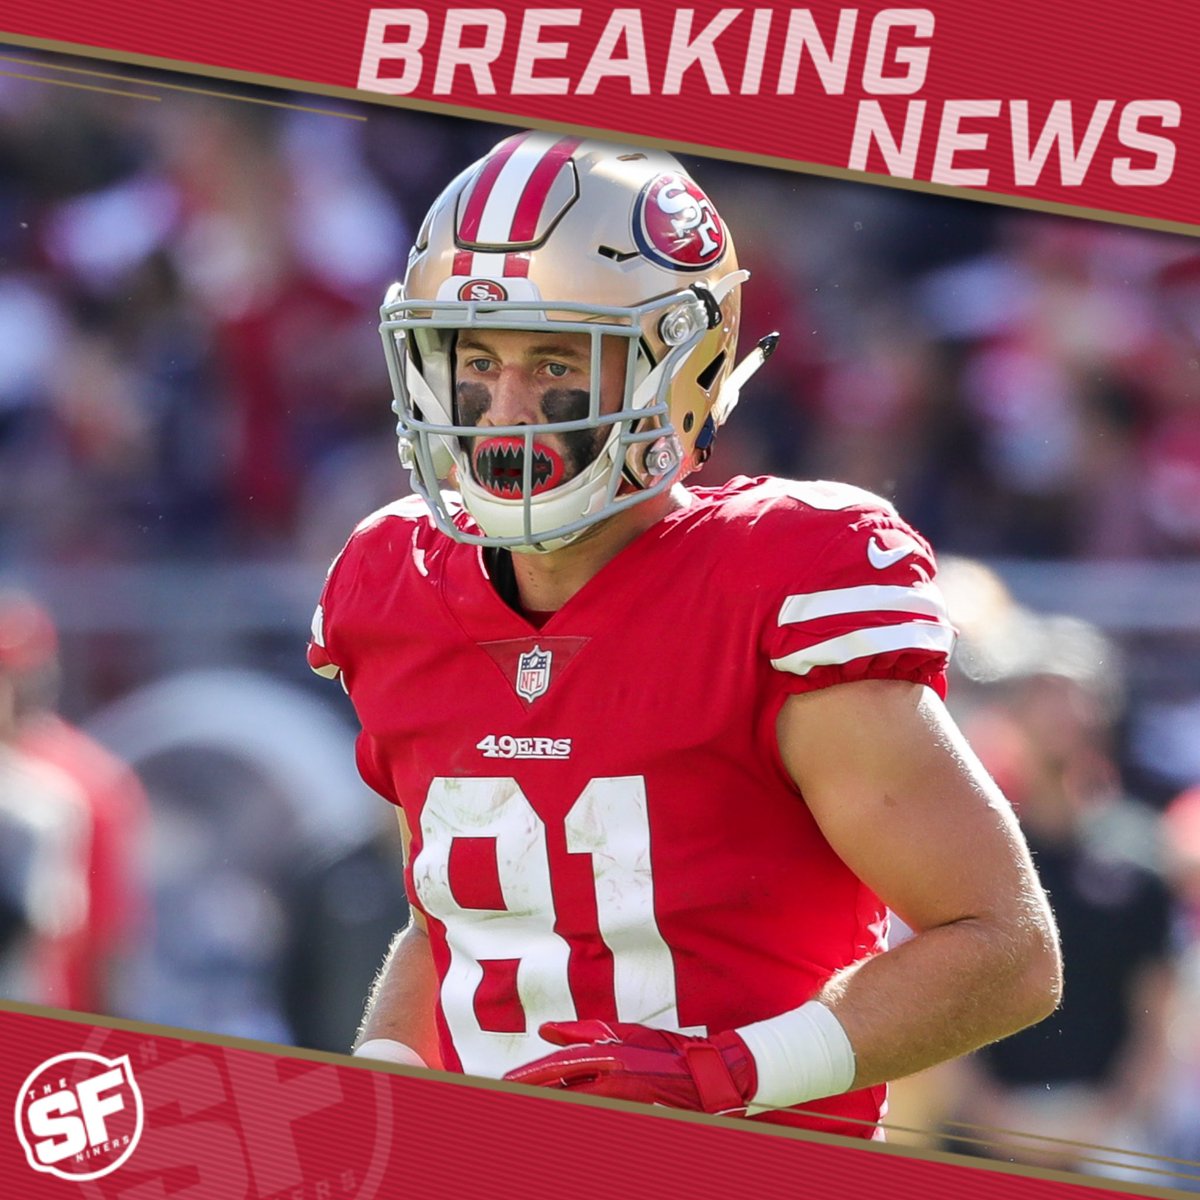 The #49ers have signed WR/PR Trent Taylor, per @Schultz_Report QUALITY TIME HAS RETURNED